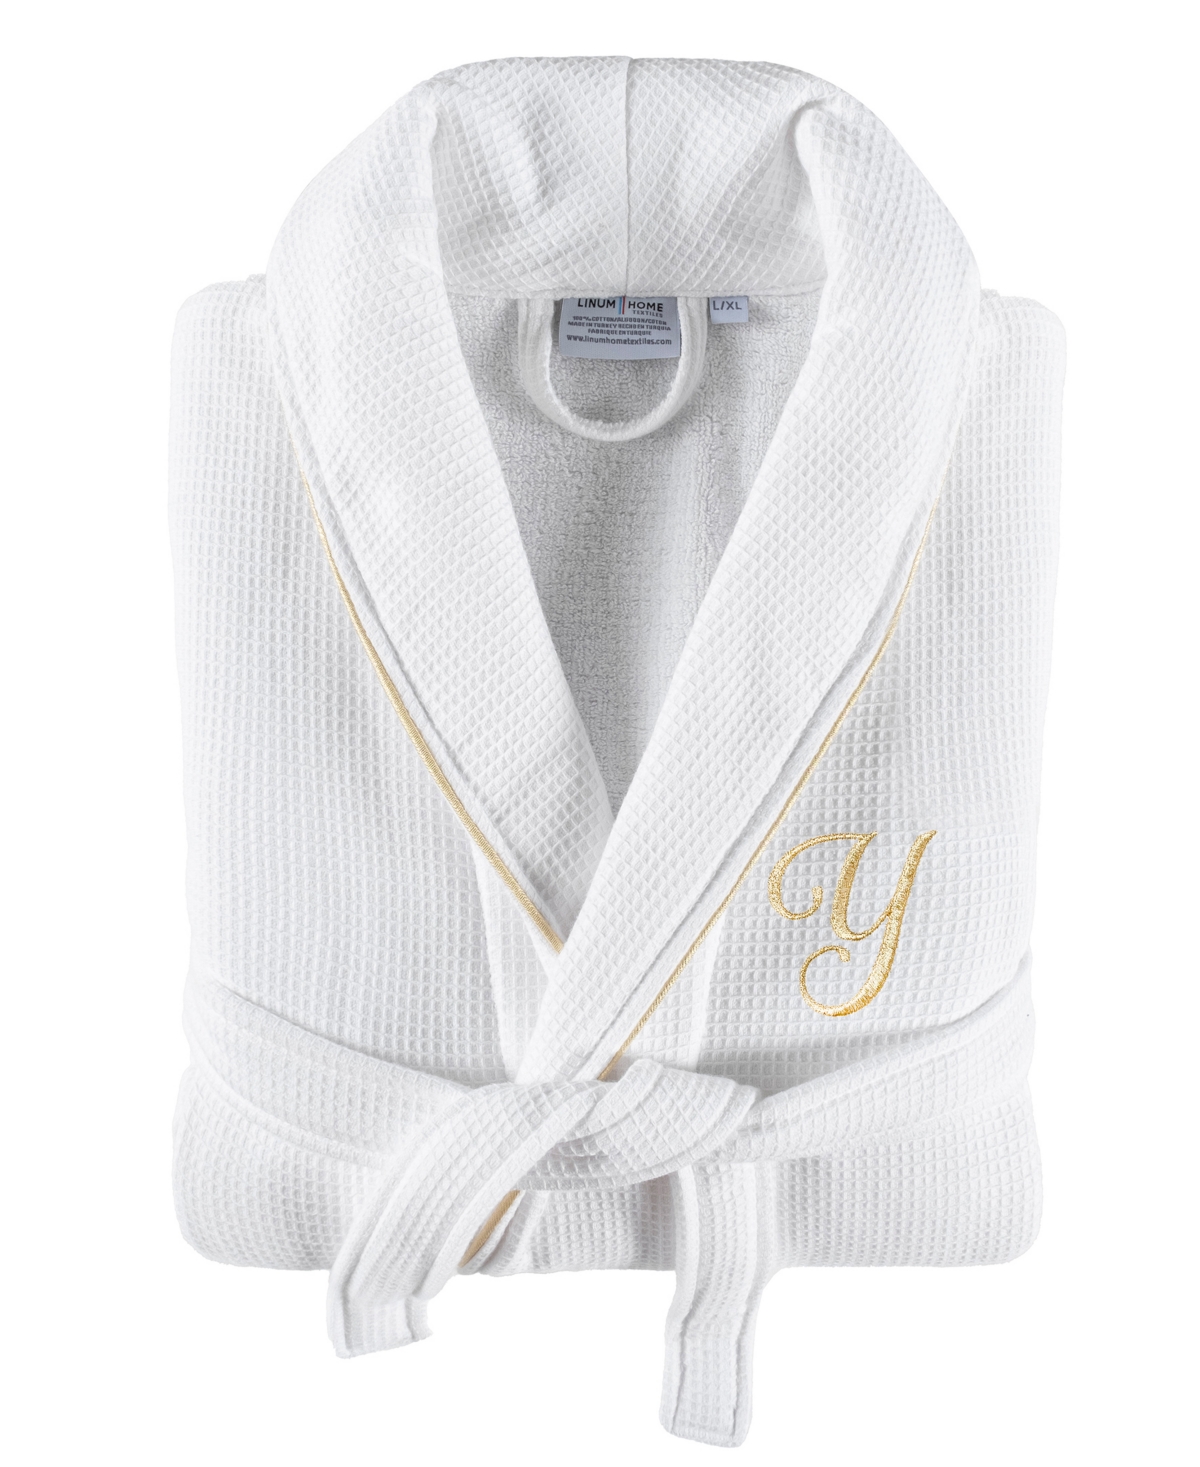 Linum Home Textiles 100% Turkish Cotton Unisex Personalized Waffle Weave Terry Bathrobe With Satin Piped Trim In White Y